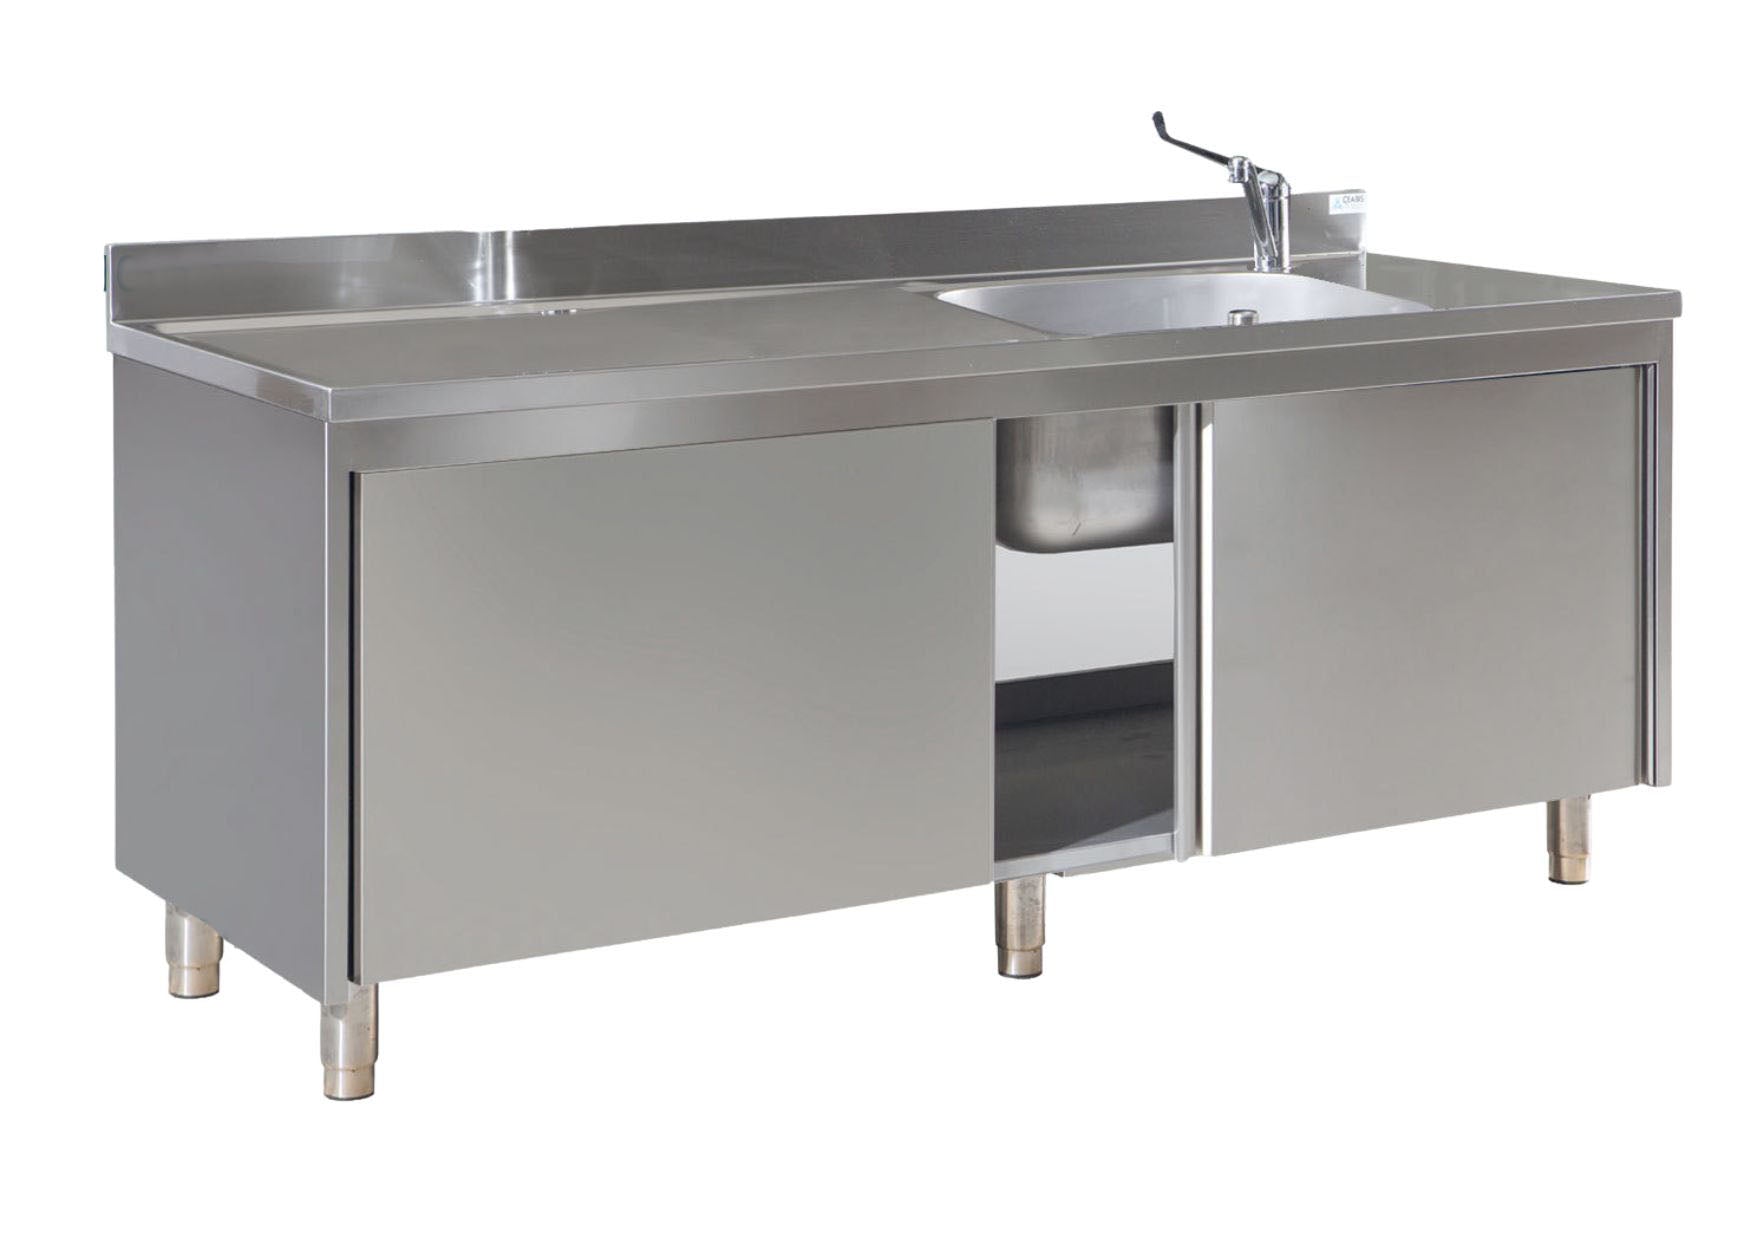 Stainless steel cupboard table with sink on the right